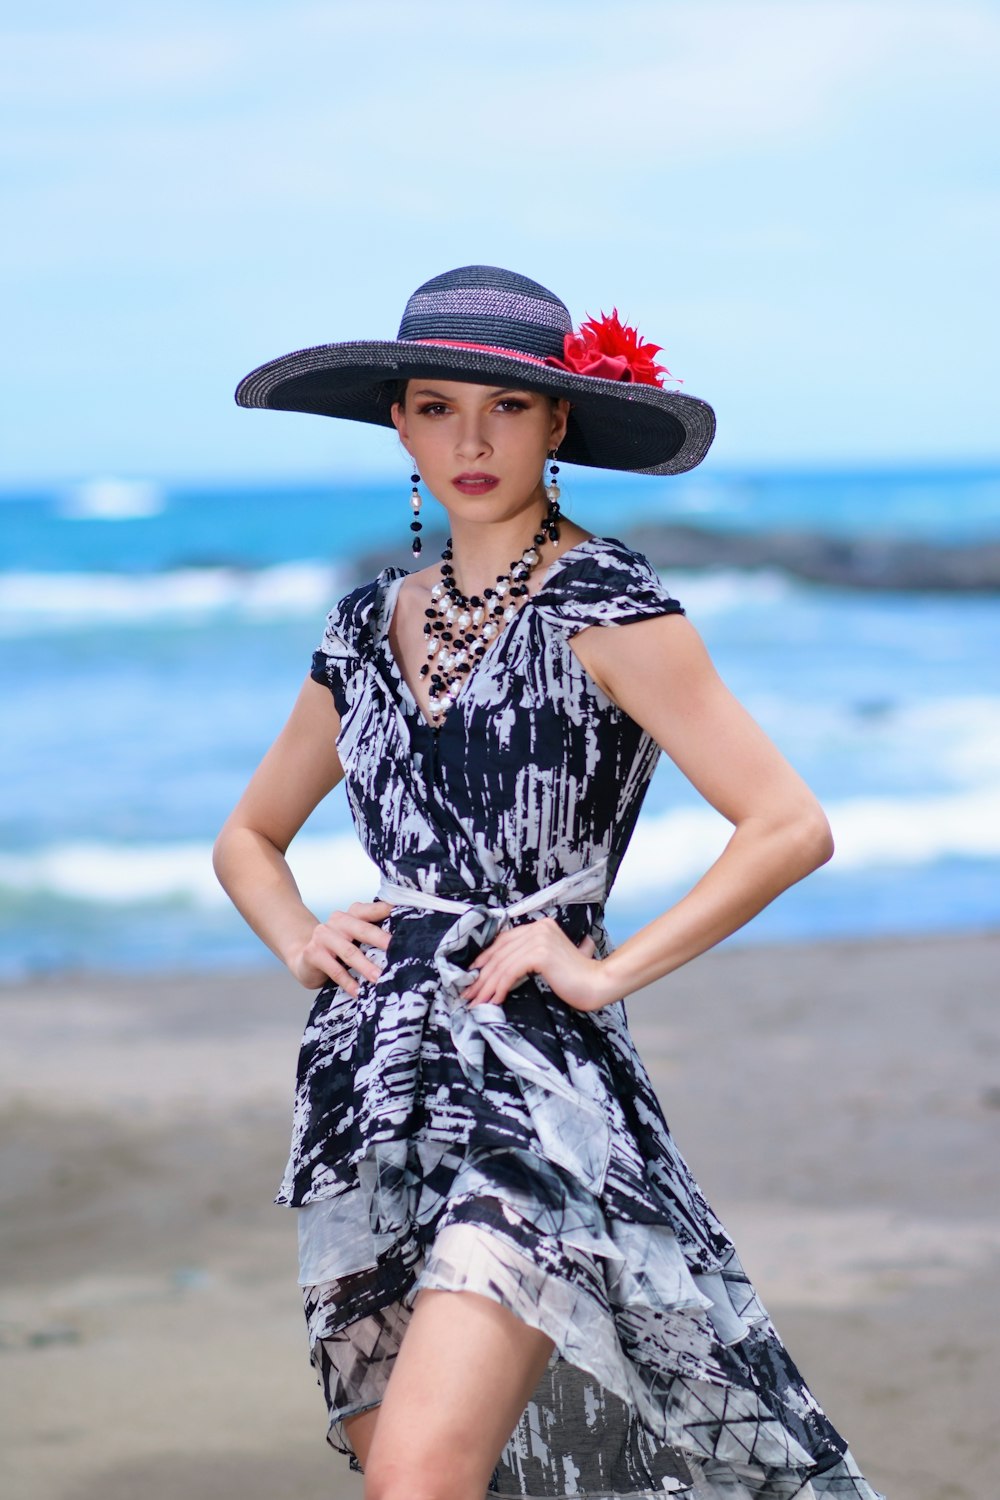 woman in black and white floral dress wearing red sun hat standing on beach during daytime